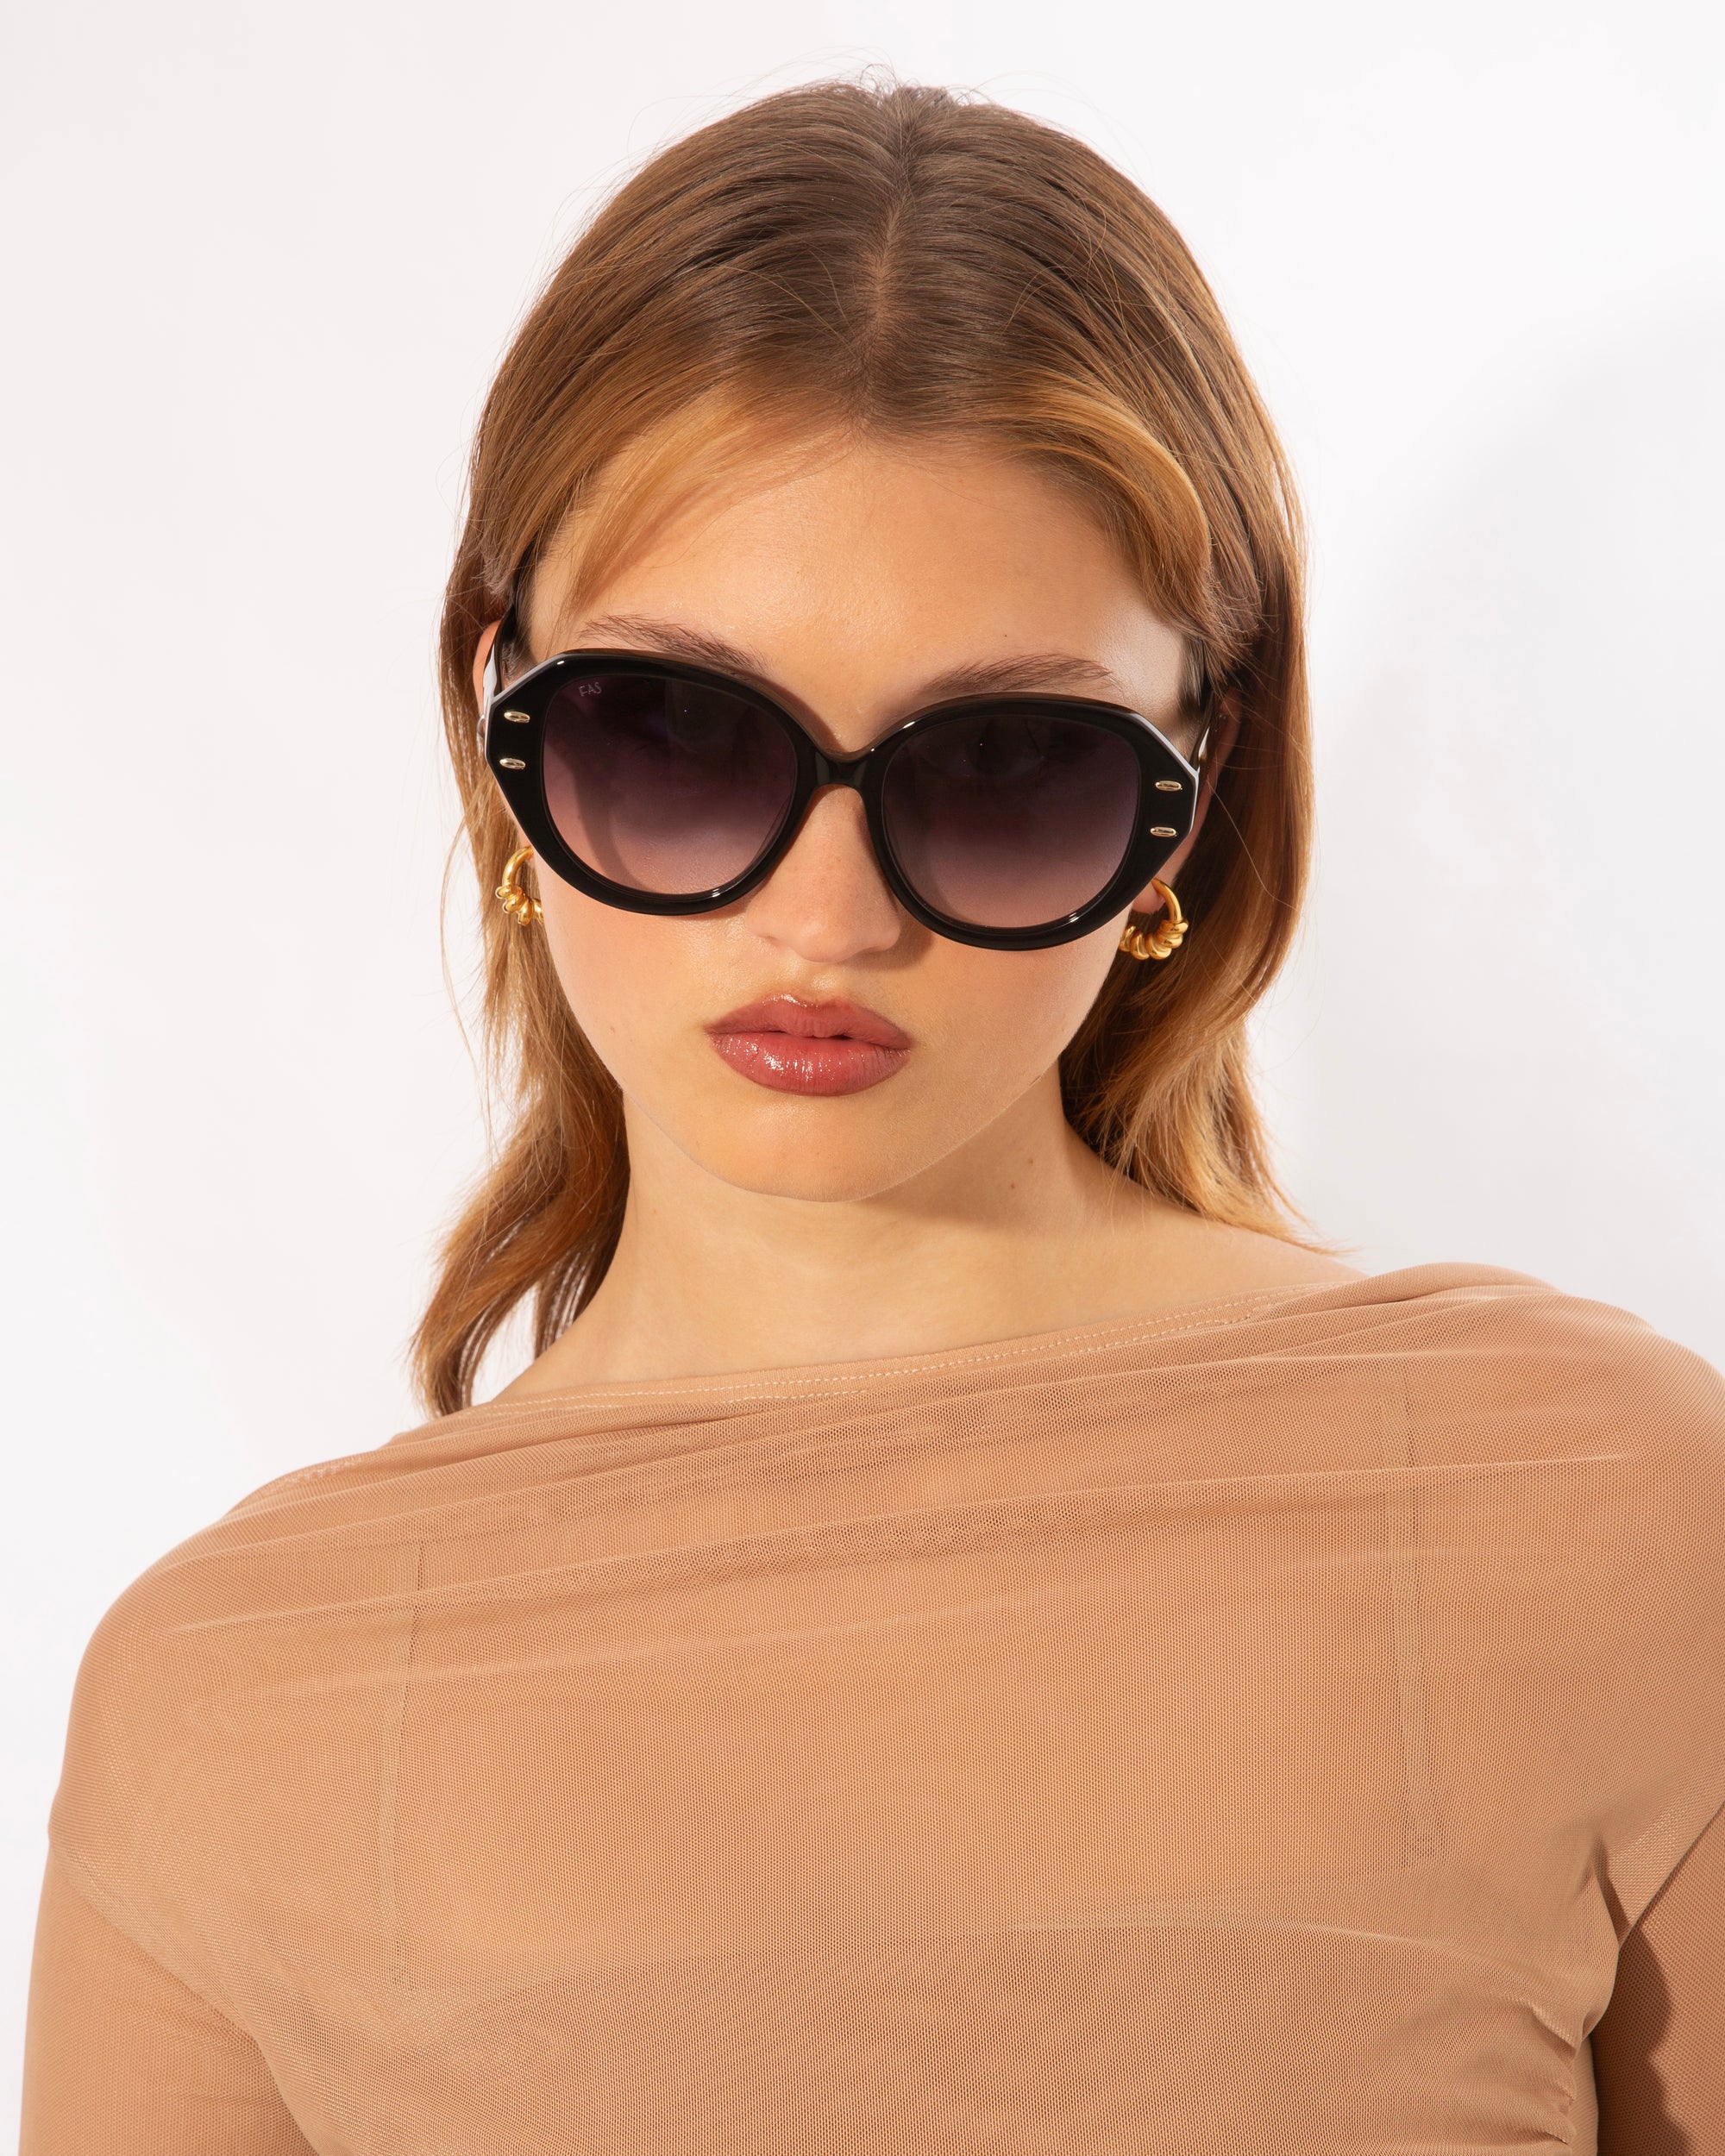 A person with light brown hair wearing large, round Mirage sunglasses by For Art&#39;s Sake® with intricate stud details and gold hoop earrings. They have a neutral expression and are dressed in a sheer, beige top. The background is plain and white.